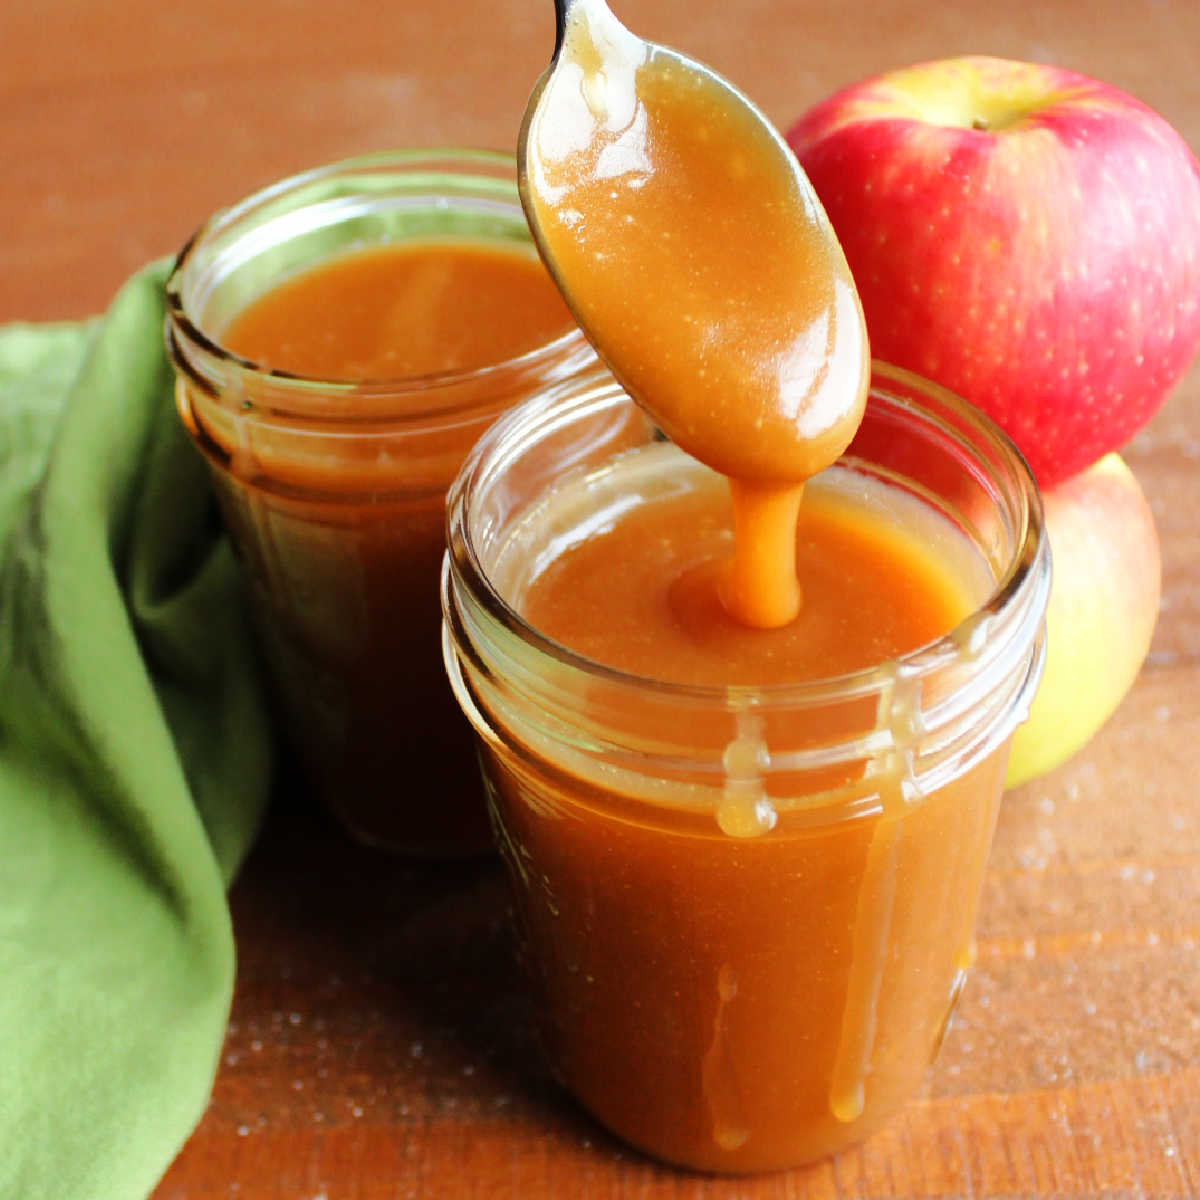 Thick apple cider caramel sauce dripping off a spoon into a jar of more smooth caramel sauce.